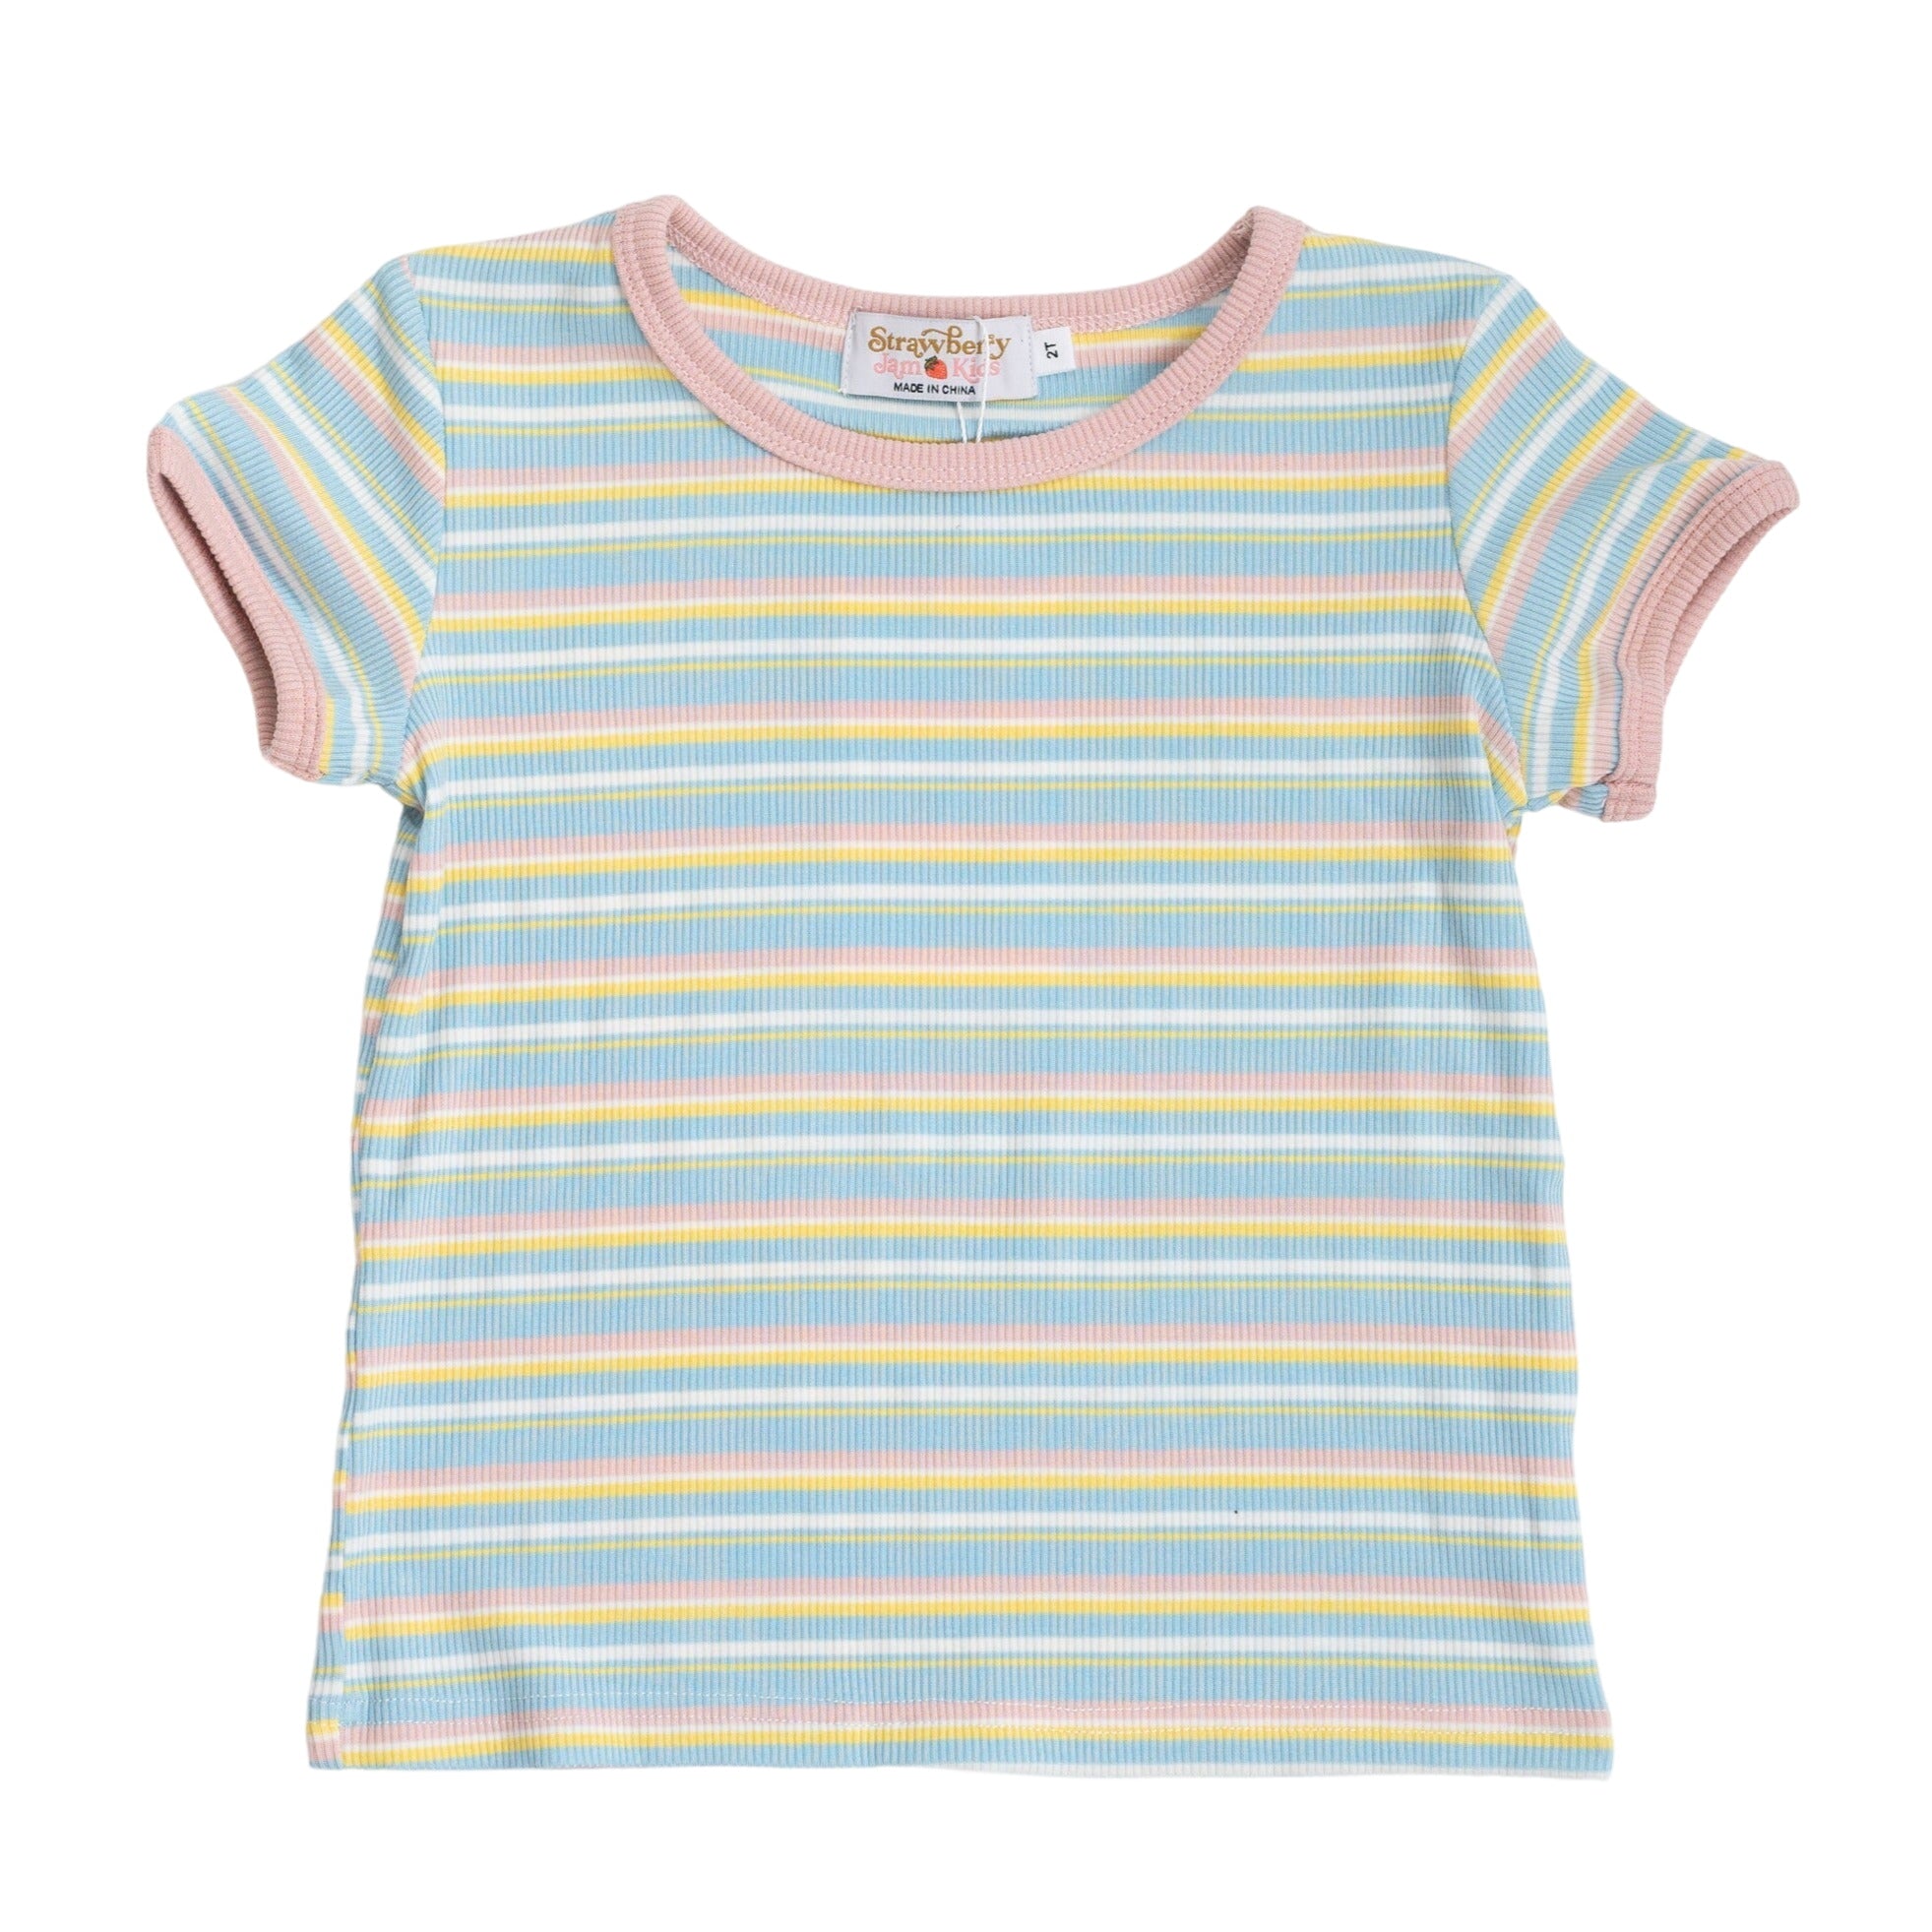 Striped Ringer T-shirt In Light Blue For Baby, Toddler And Kids